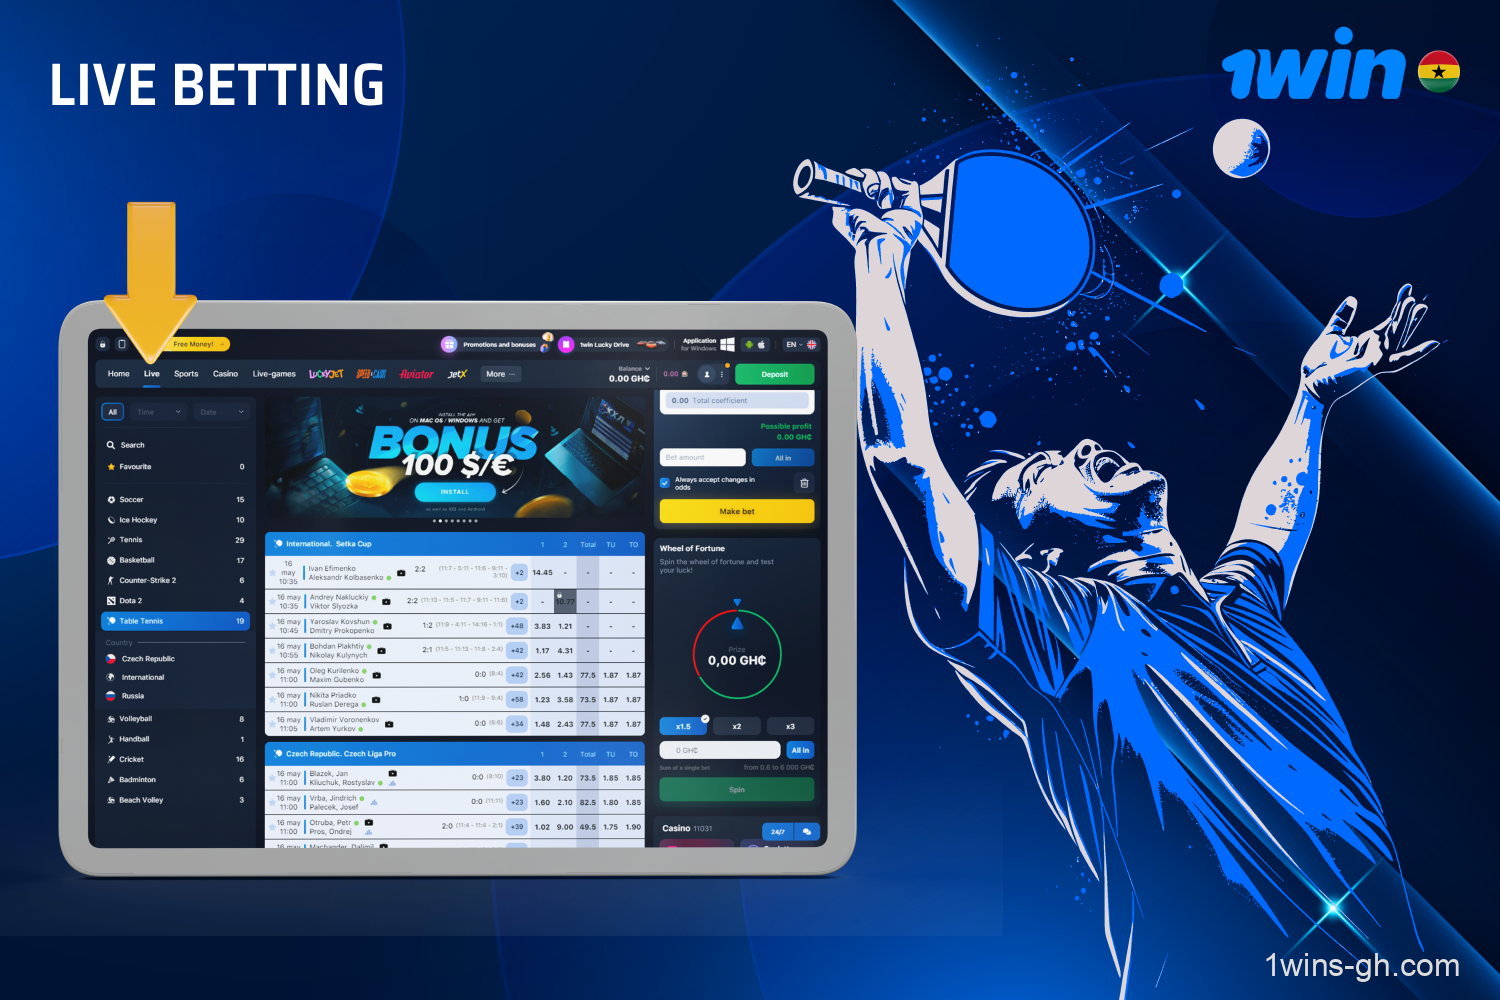 Betting on live events is also popular with 1win players from Ghana